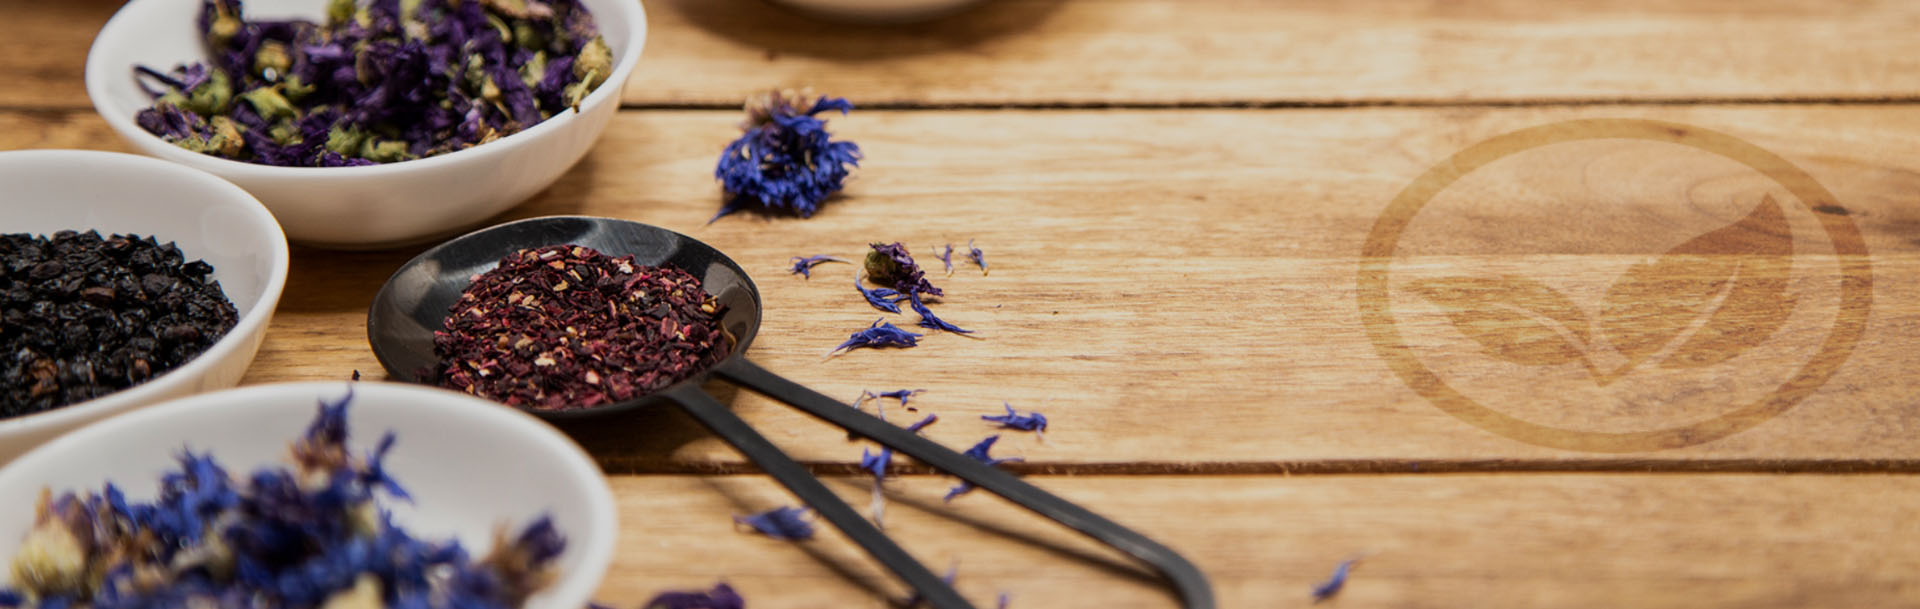 dried blue and purple flowers, dark berries and a red tea blend are beautifully arranged in bowls